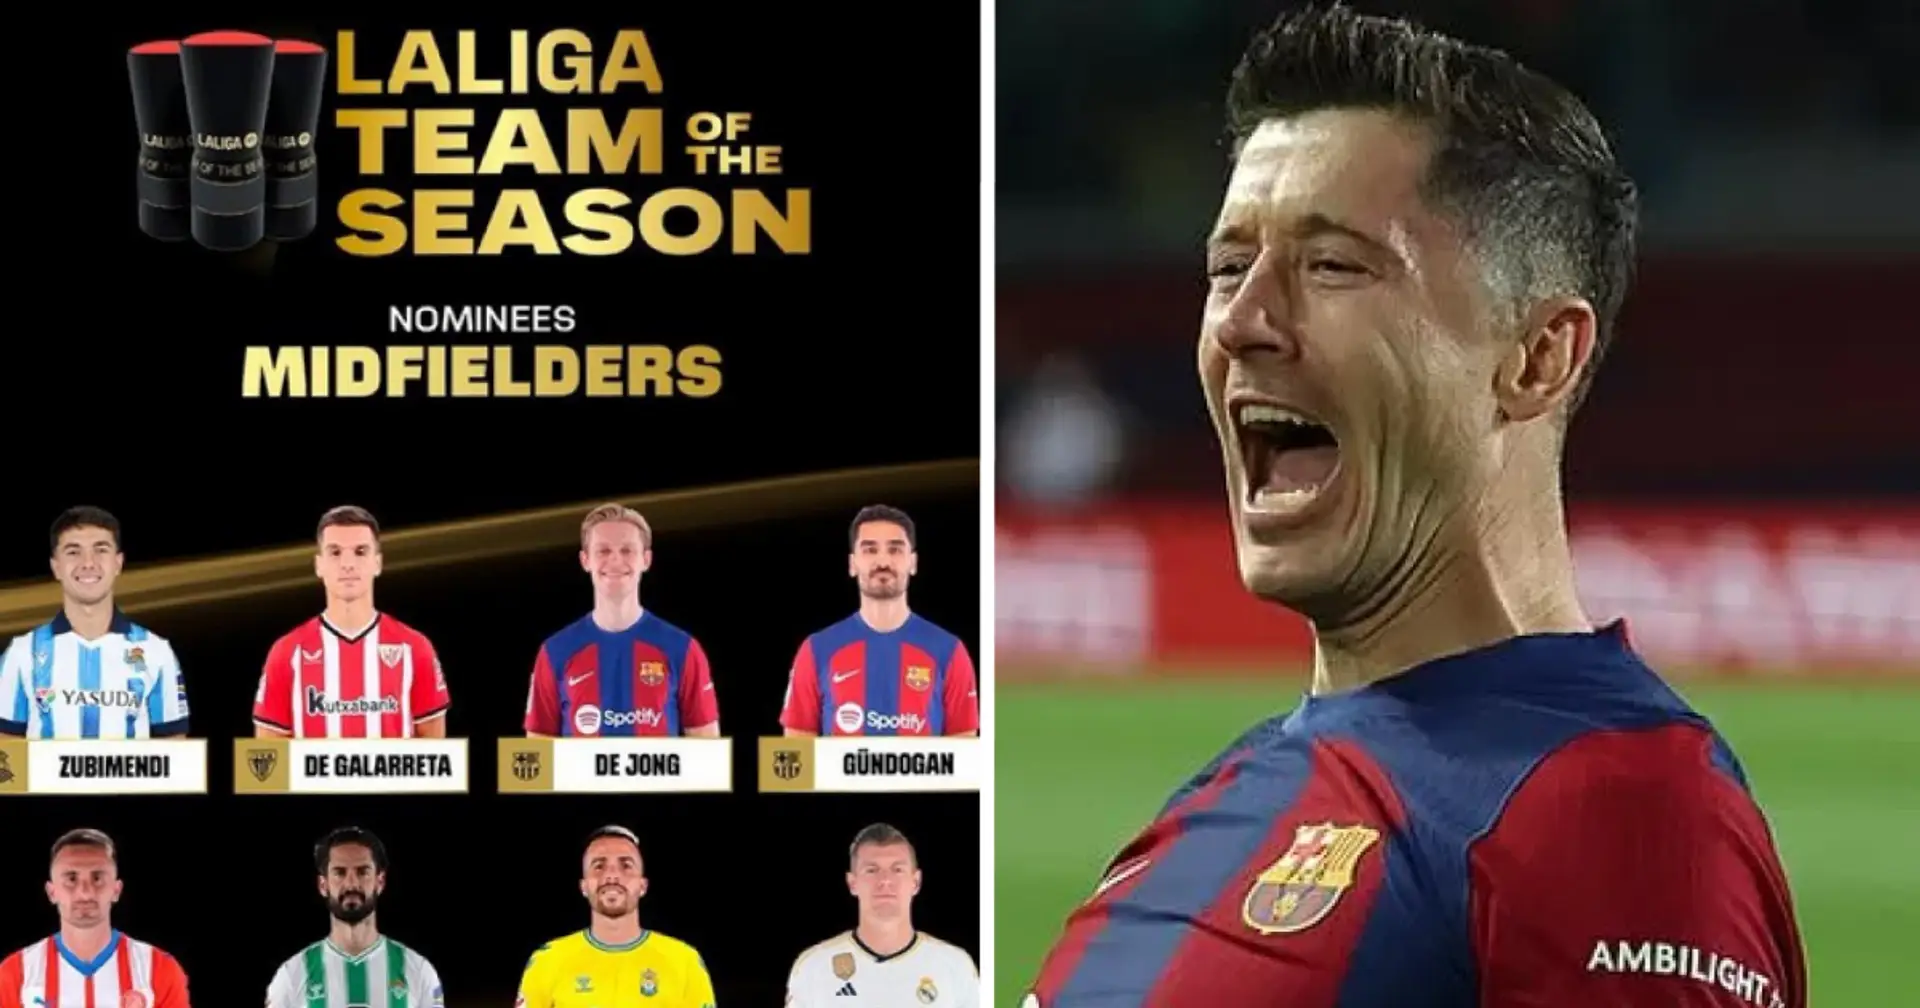 6 Barca players nominated for La Liga Team of the Season — 8 more from Real Madrid